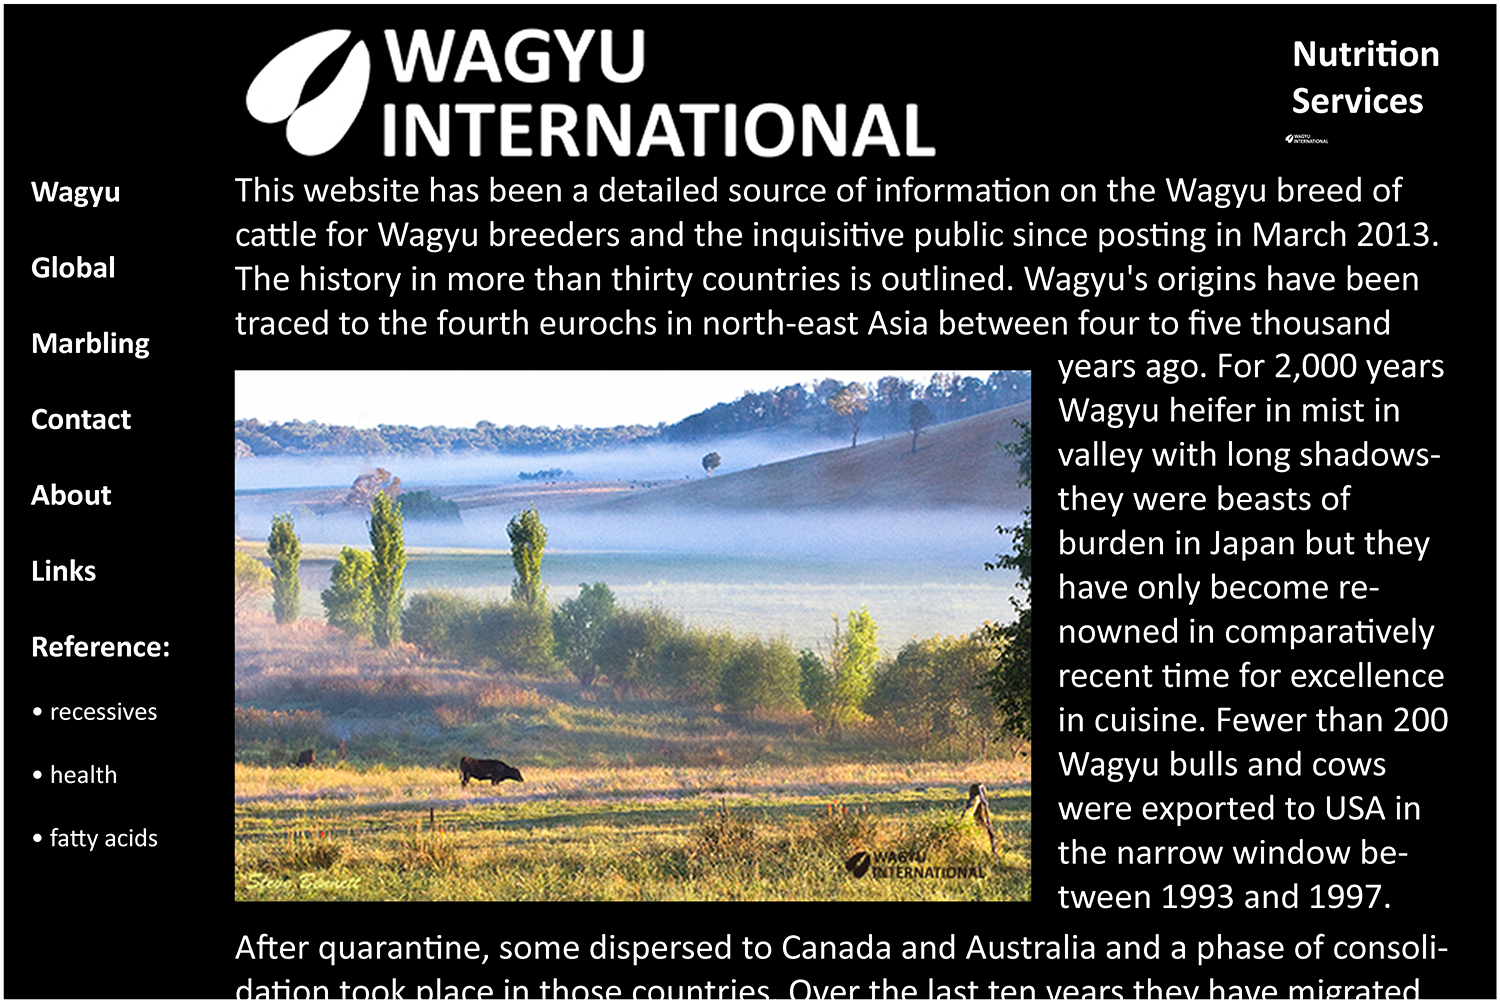 Homepage from Wagyu International the website that Steve designed and powers